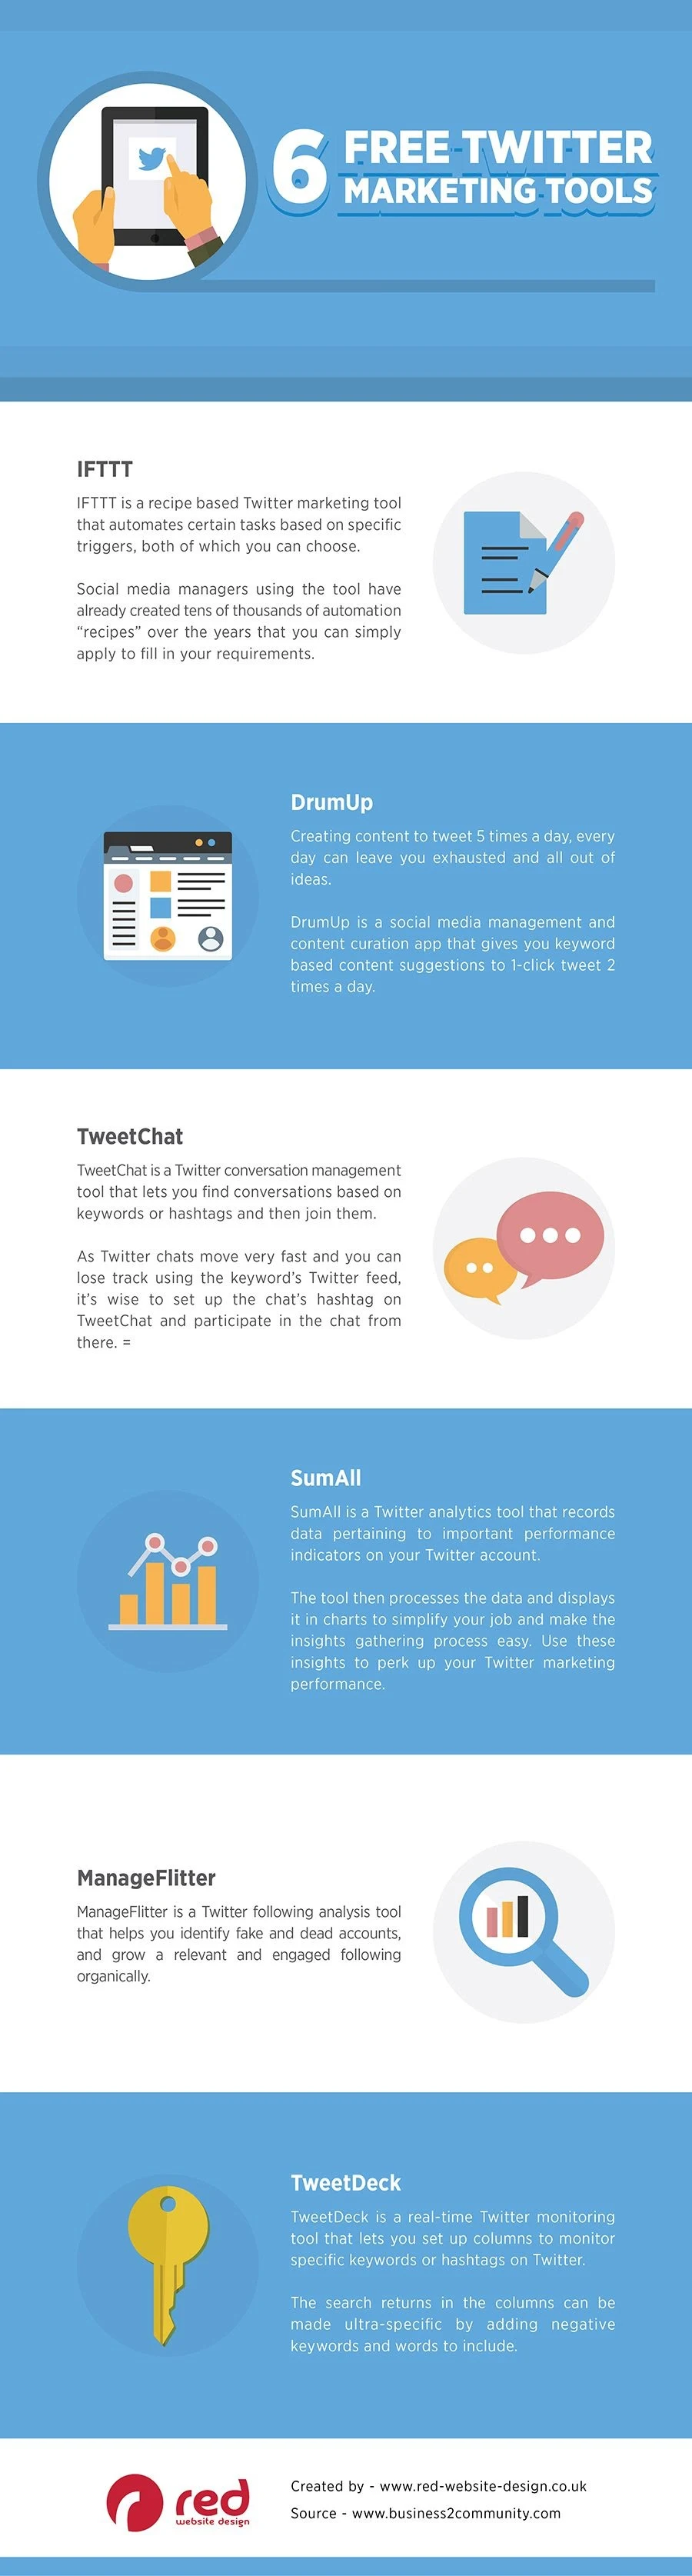 6 Free Twitter Marketing Tools - #Infographic